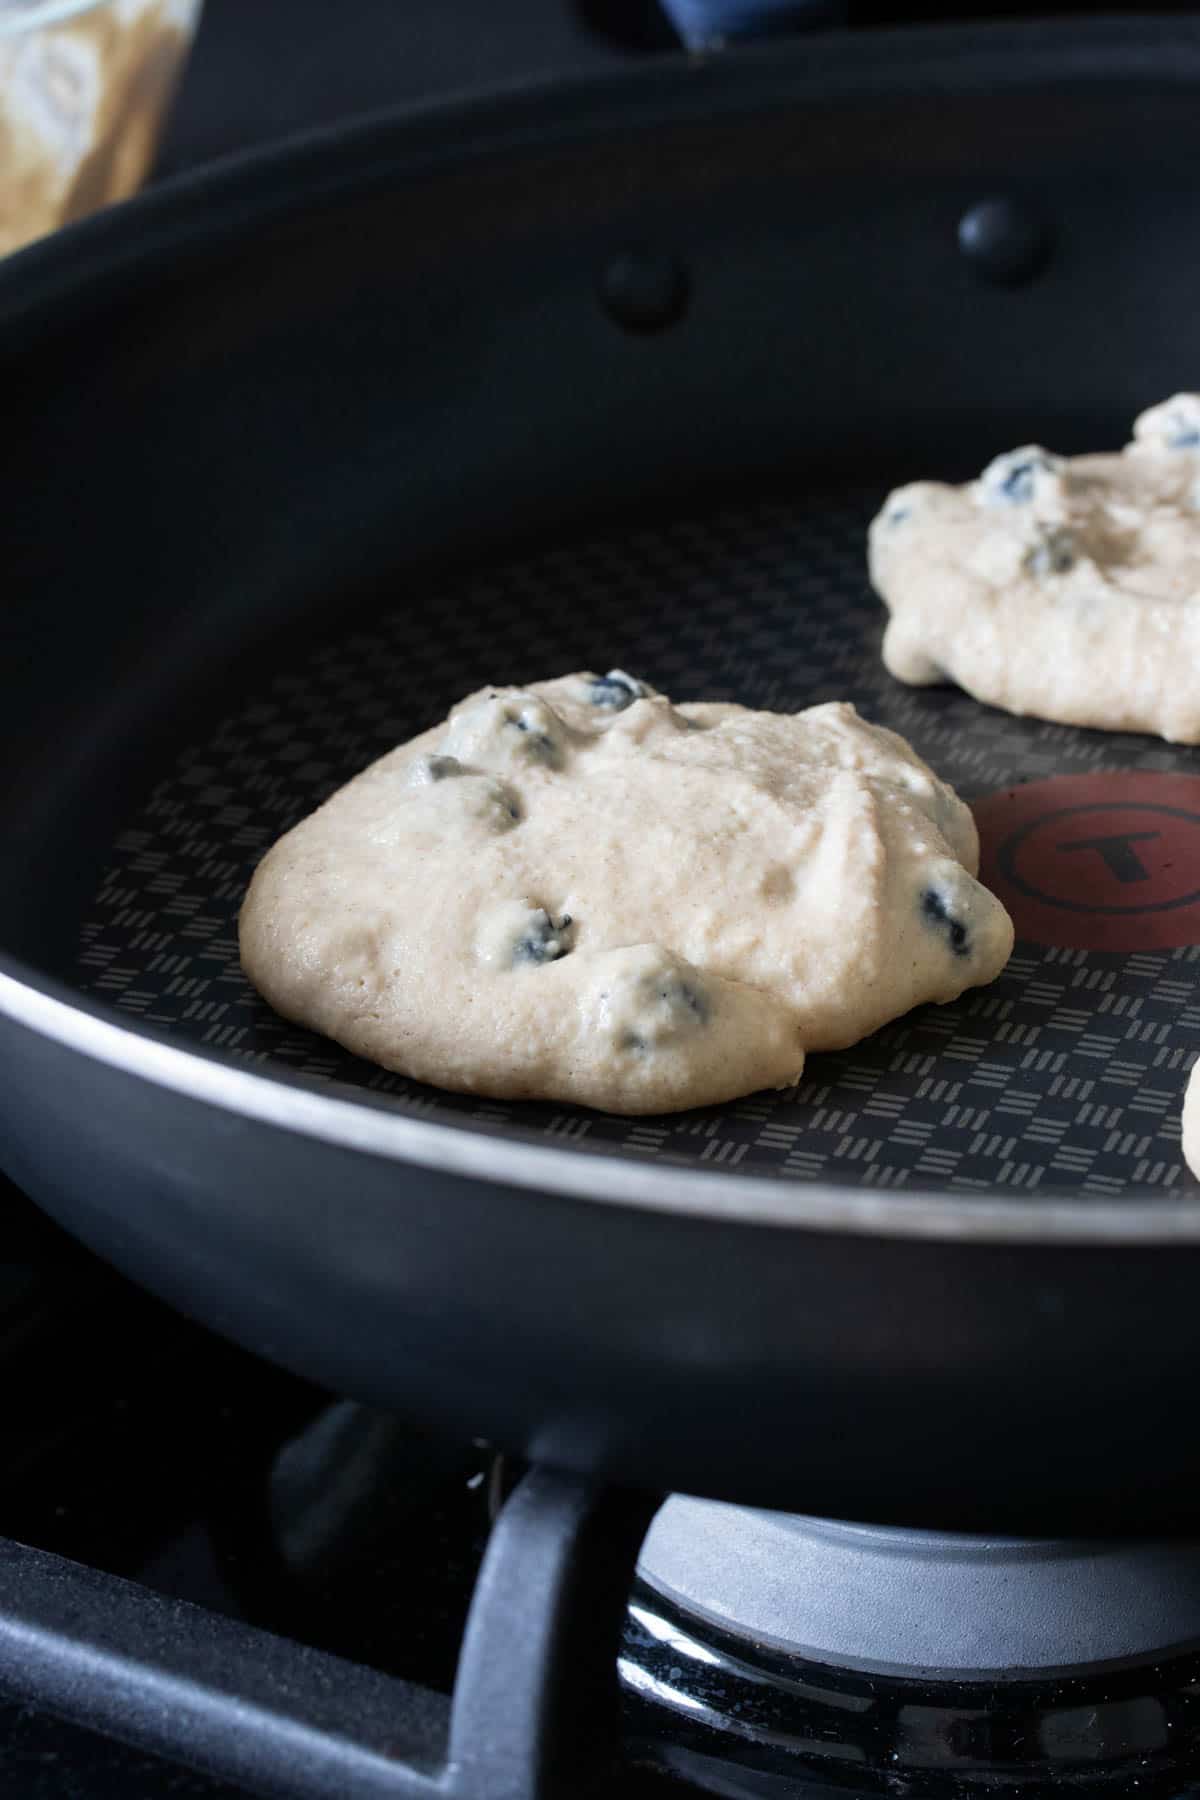 Blueberry pancakes being cooked on a black pan.